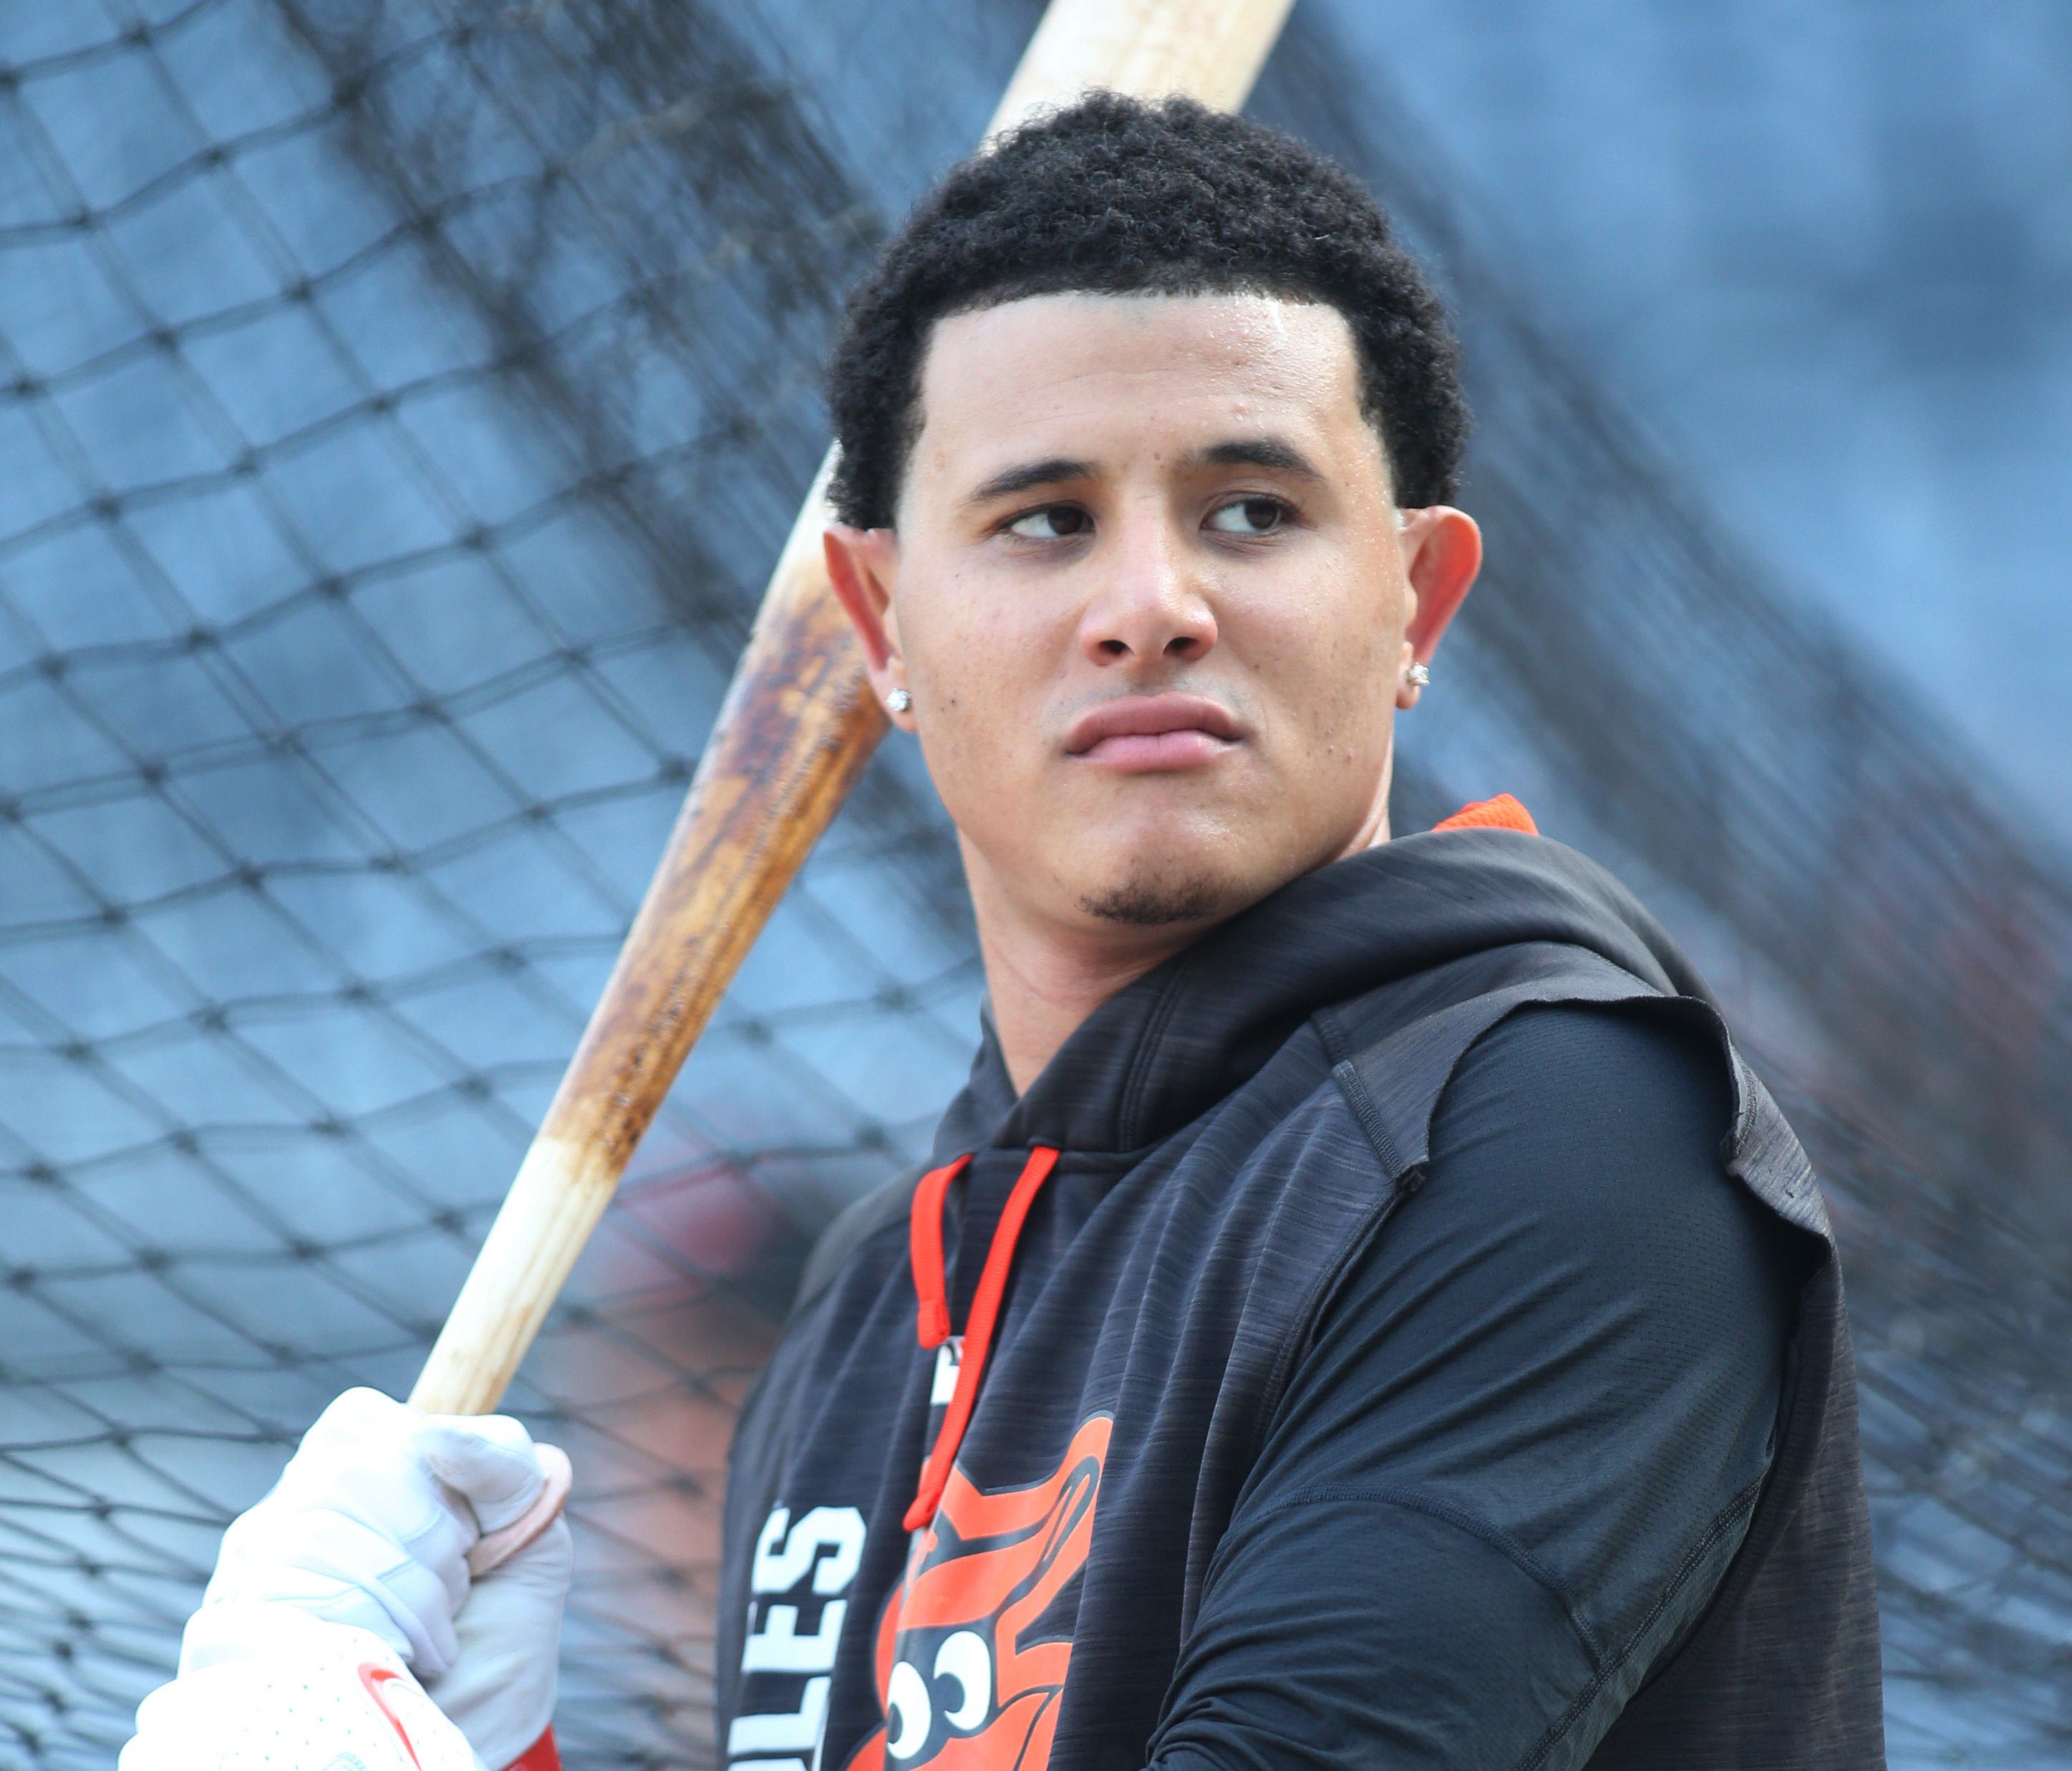 Orioles 3B Manny Machado becomes a free agent after the 2018 season.